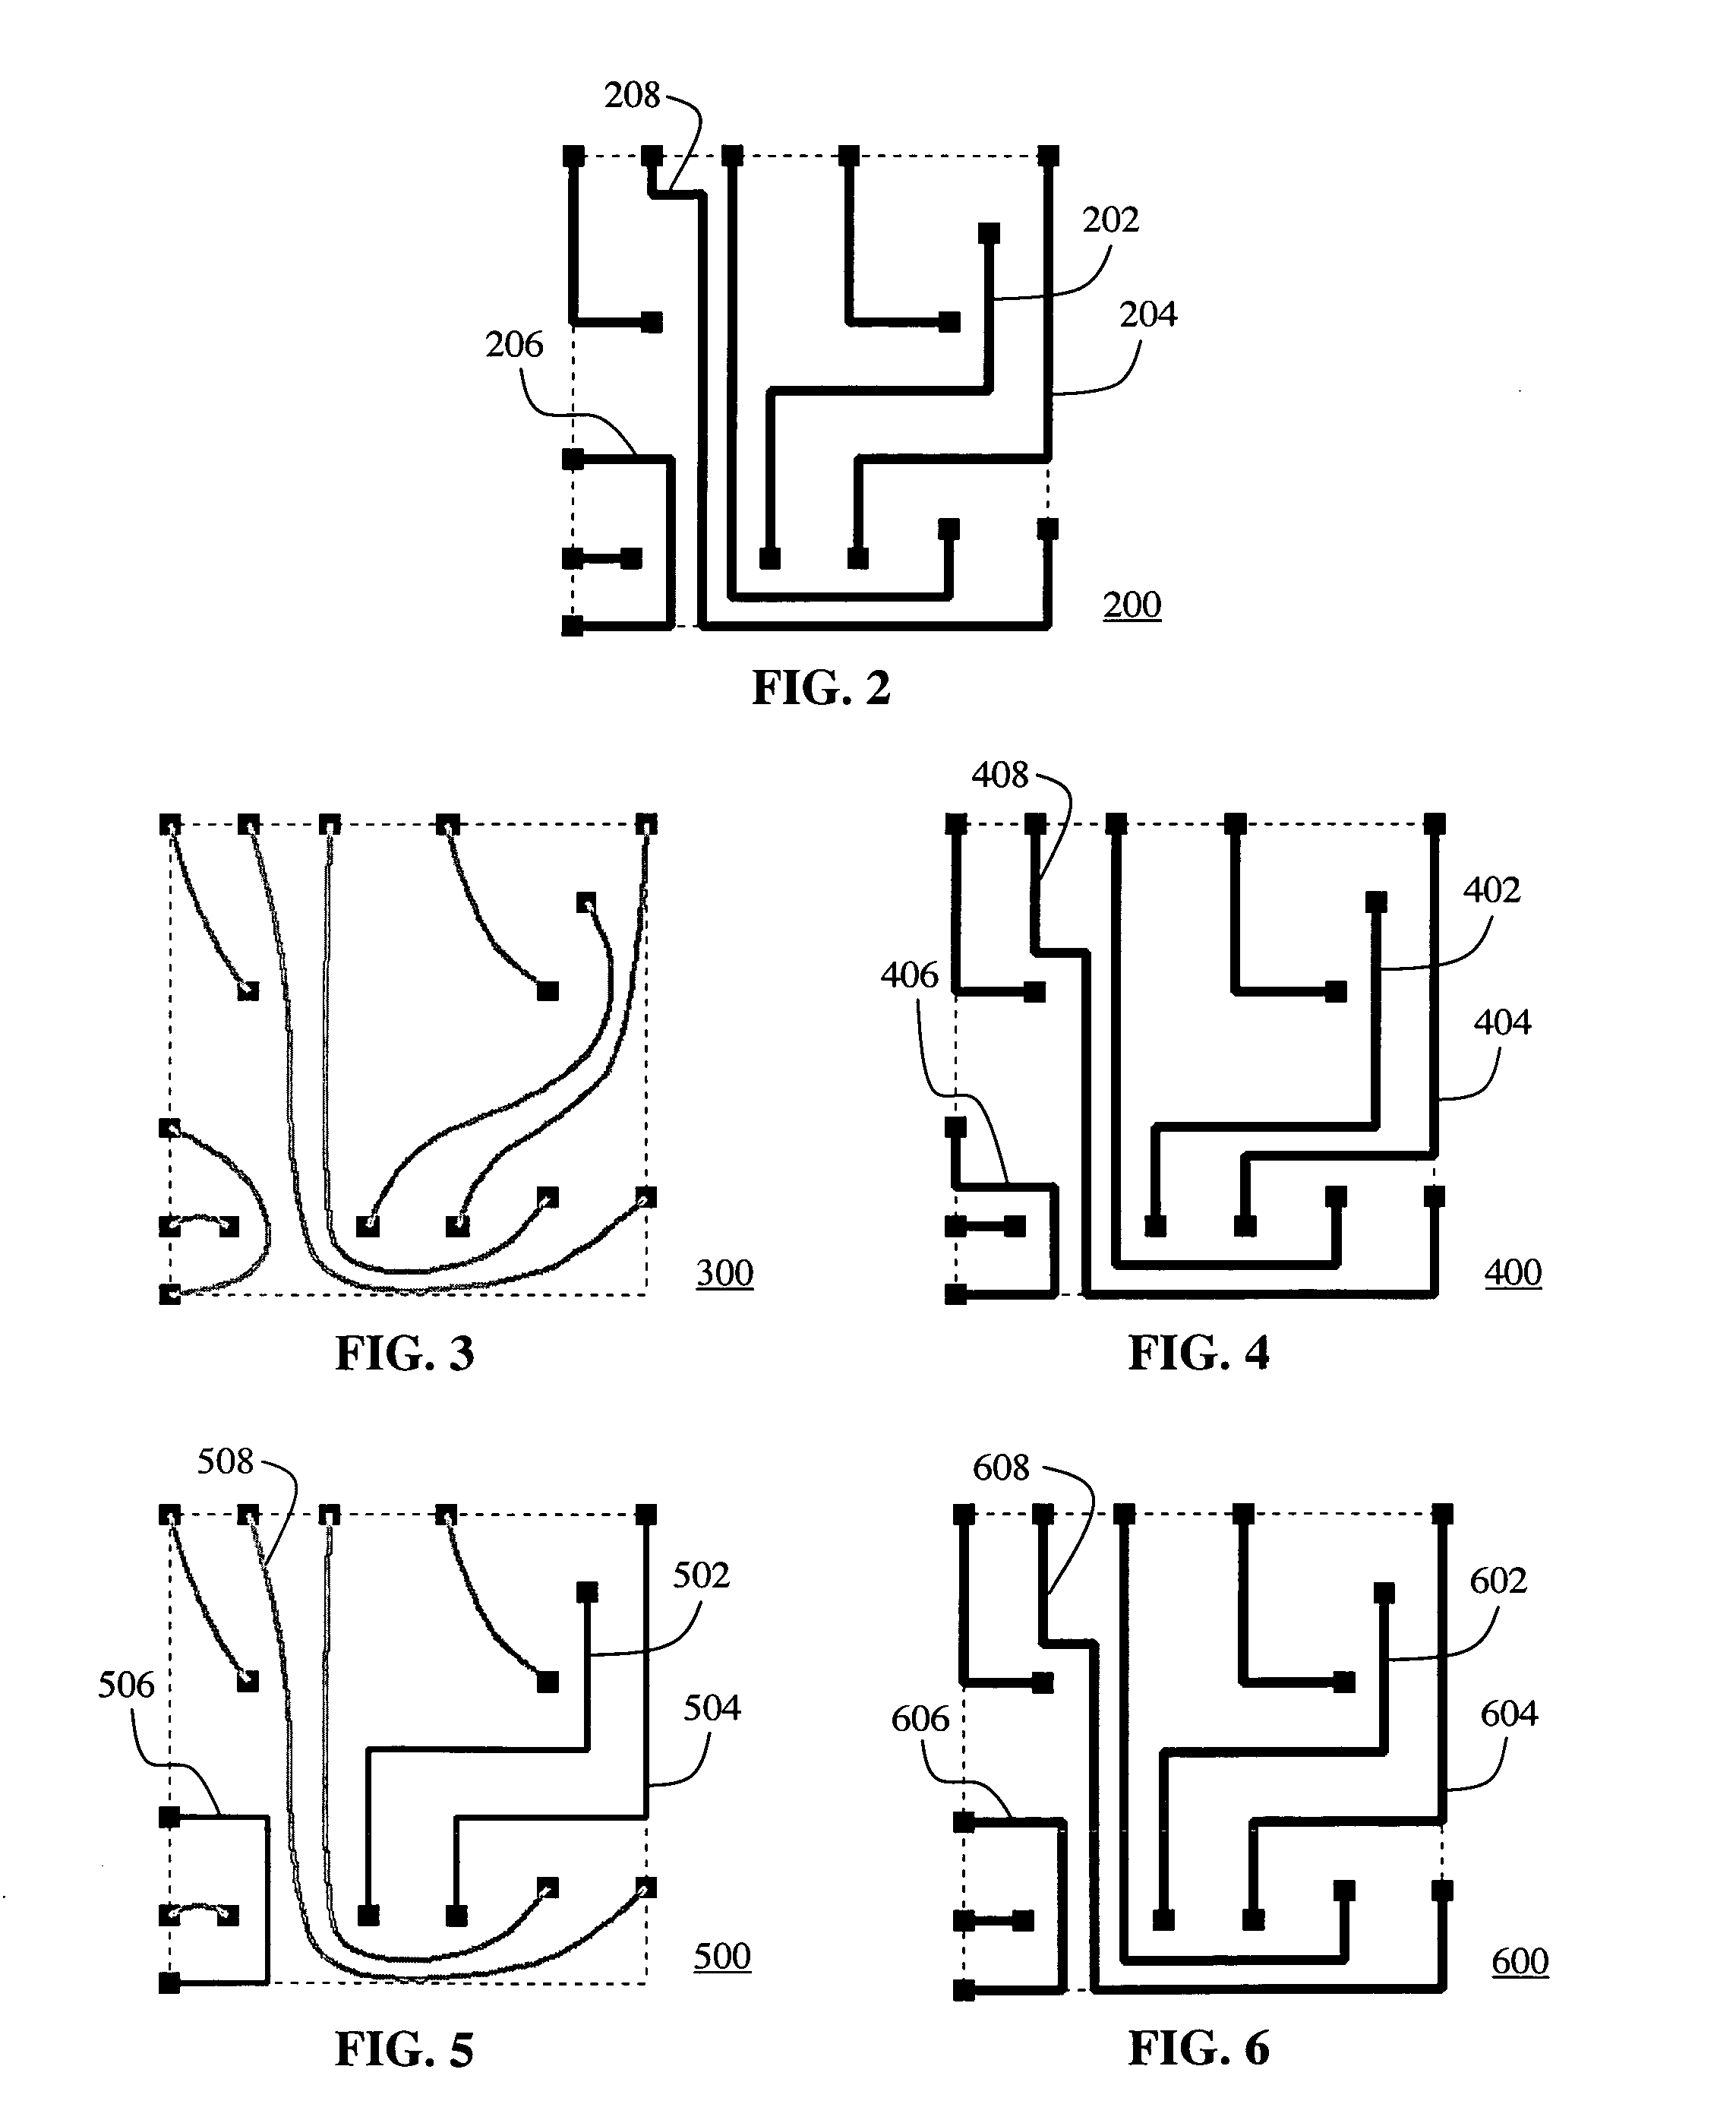 Routed layout optimization with geotopological layout encoding for integrated circuit designs